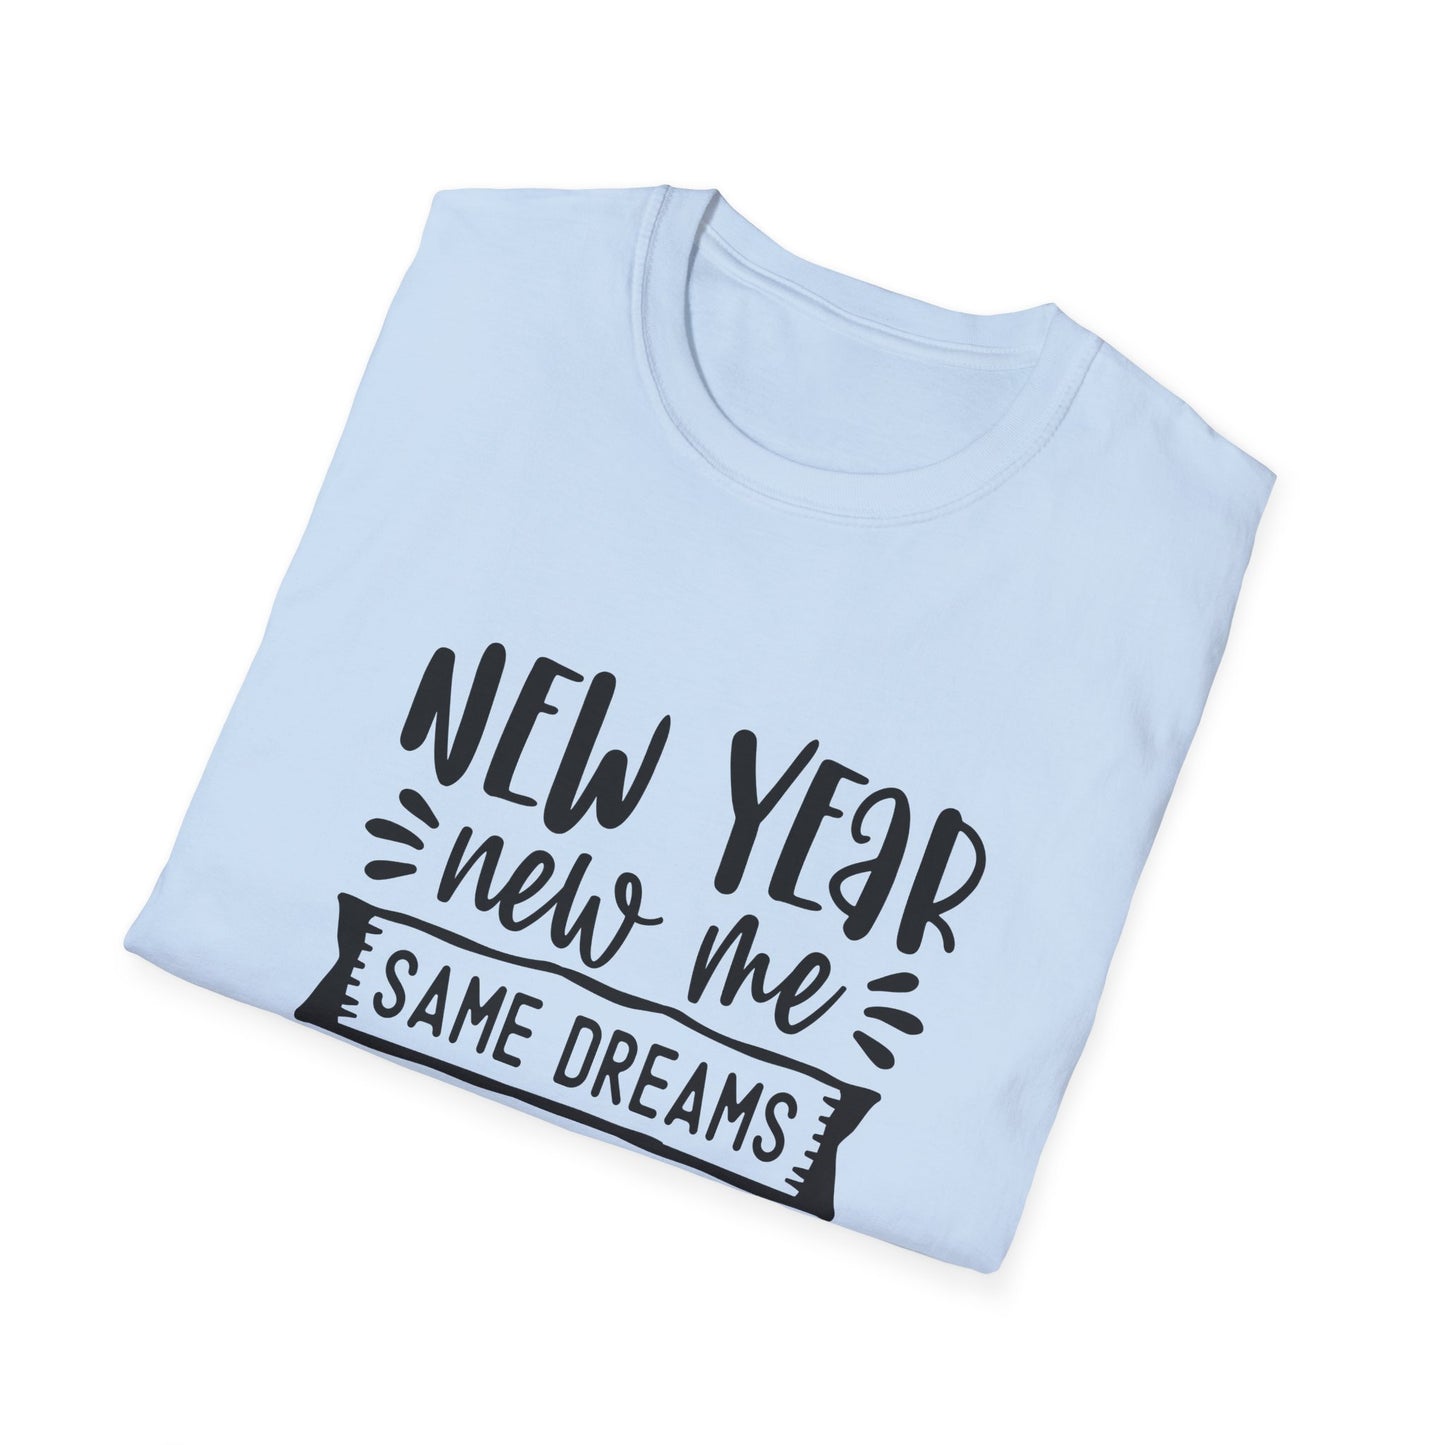 New Year New Me Unisex Softstyle T-Shirt